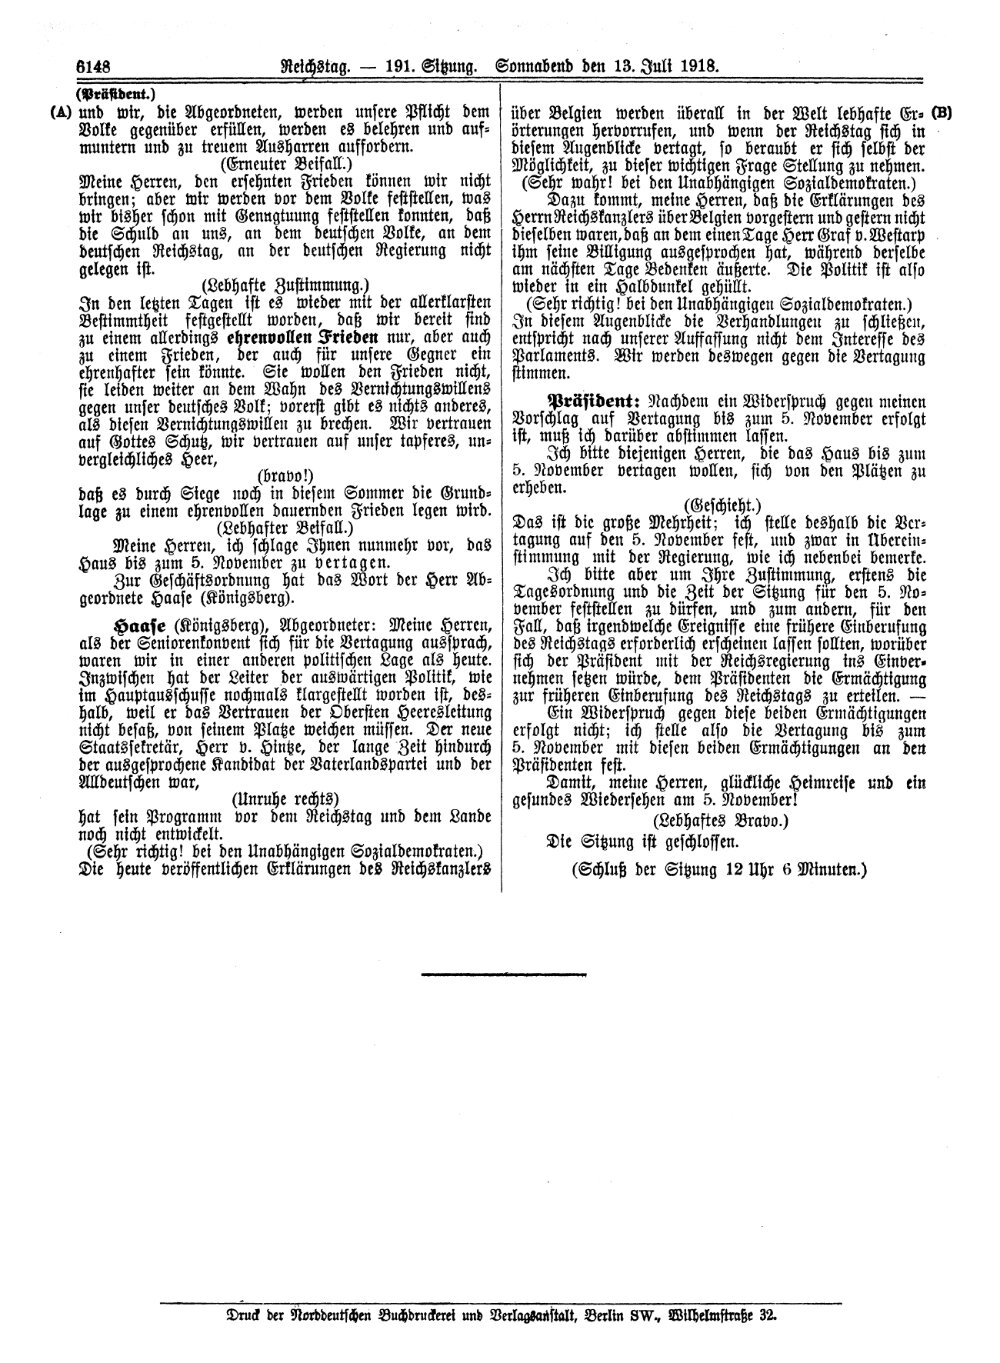 Scan of page 6148